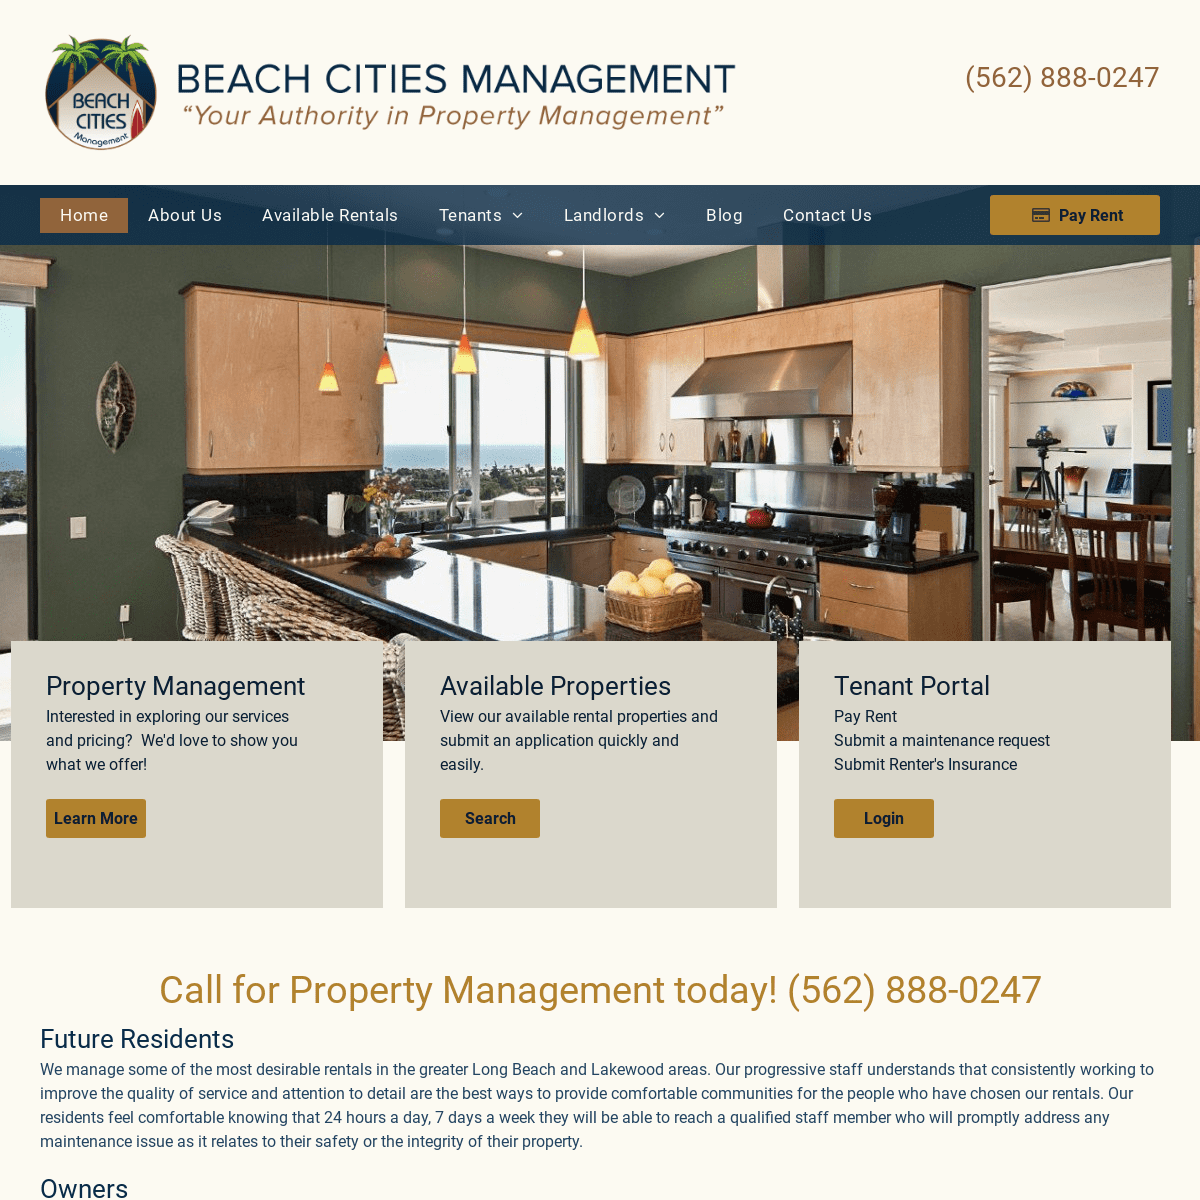 A complete backup of beachcitiesmanagement.com